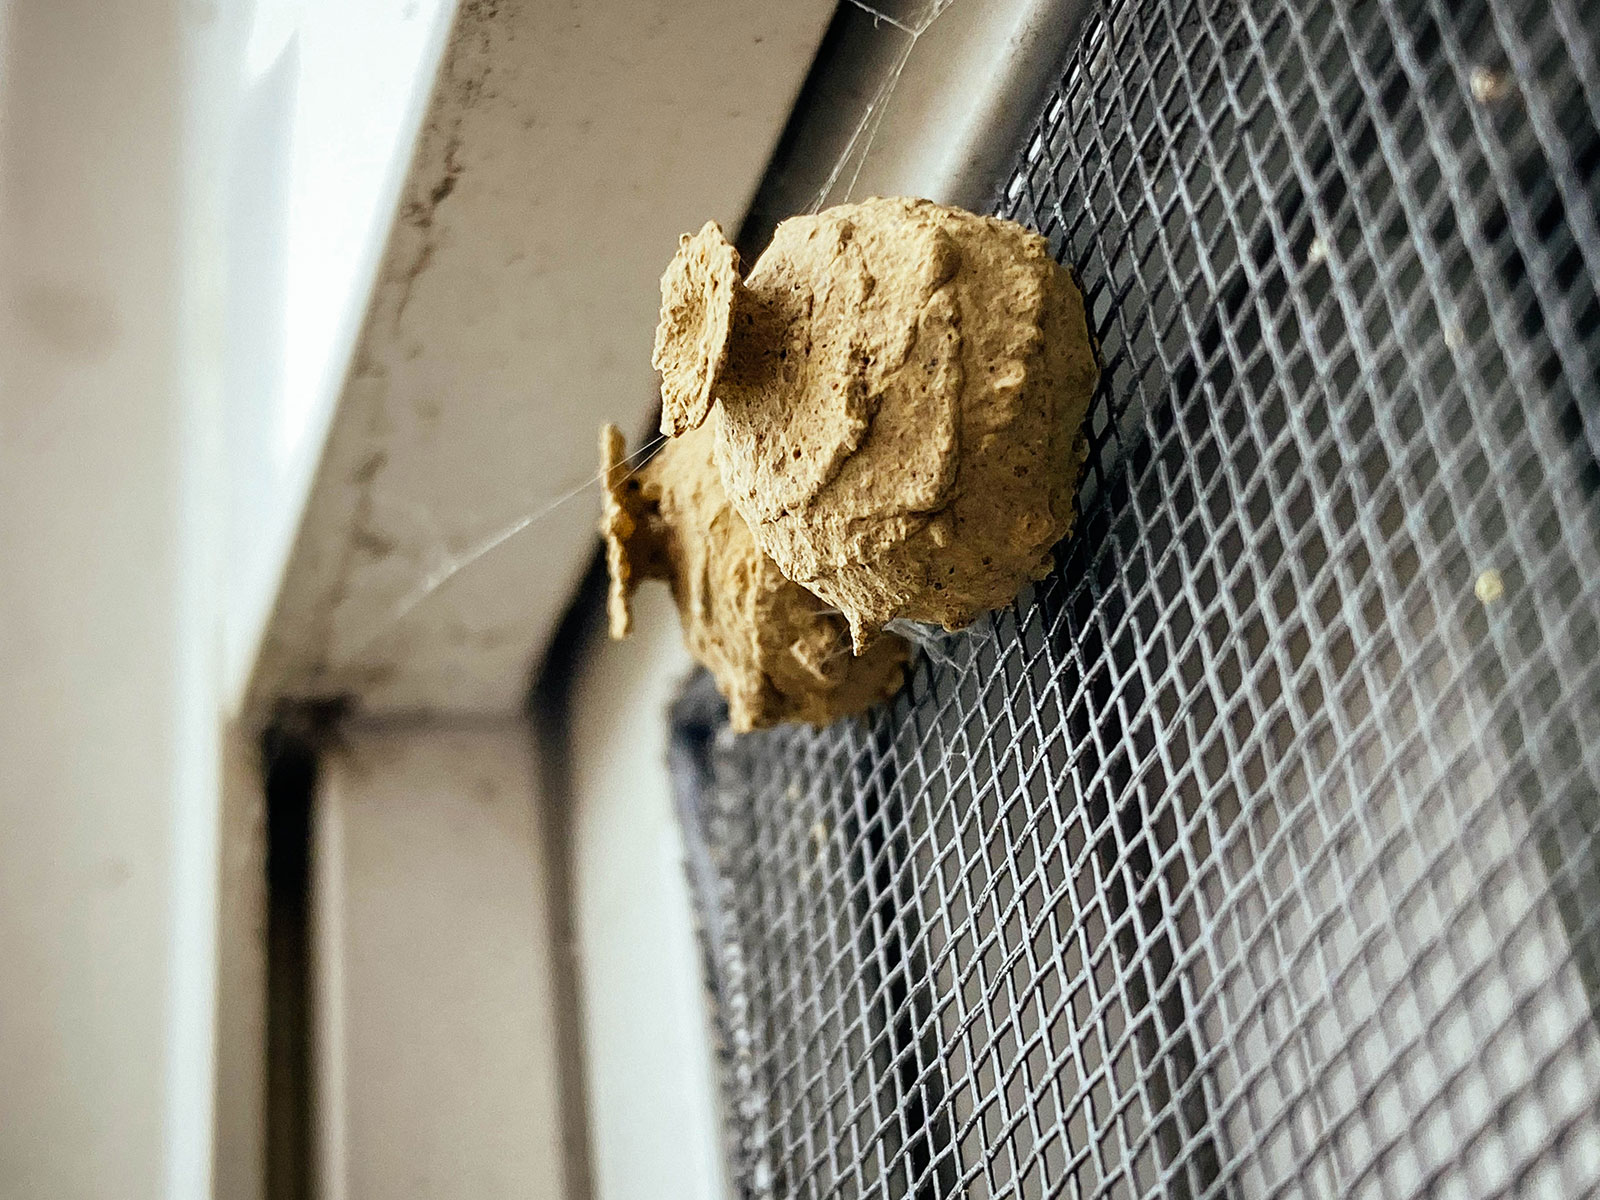 Potter wasp nests on a window screen